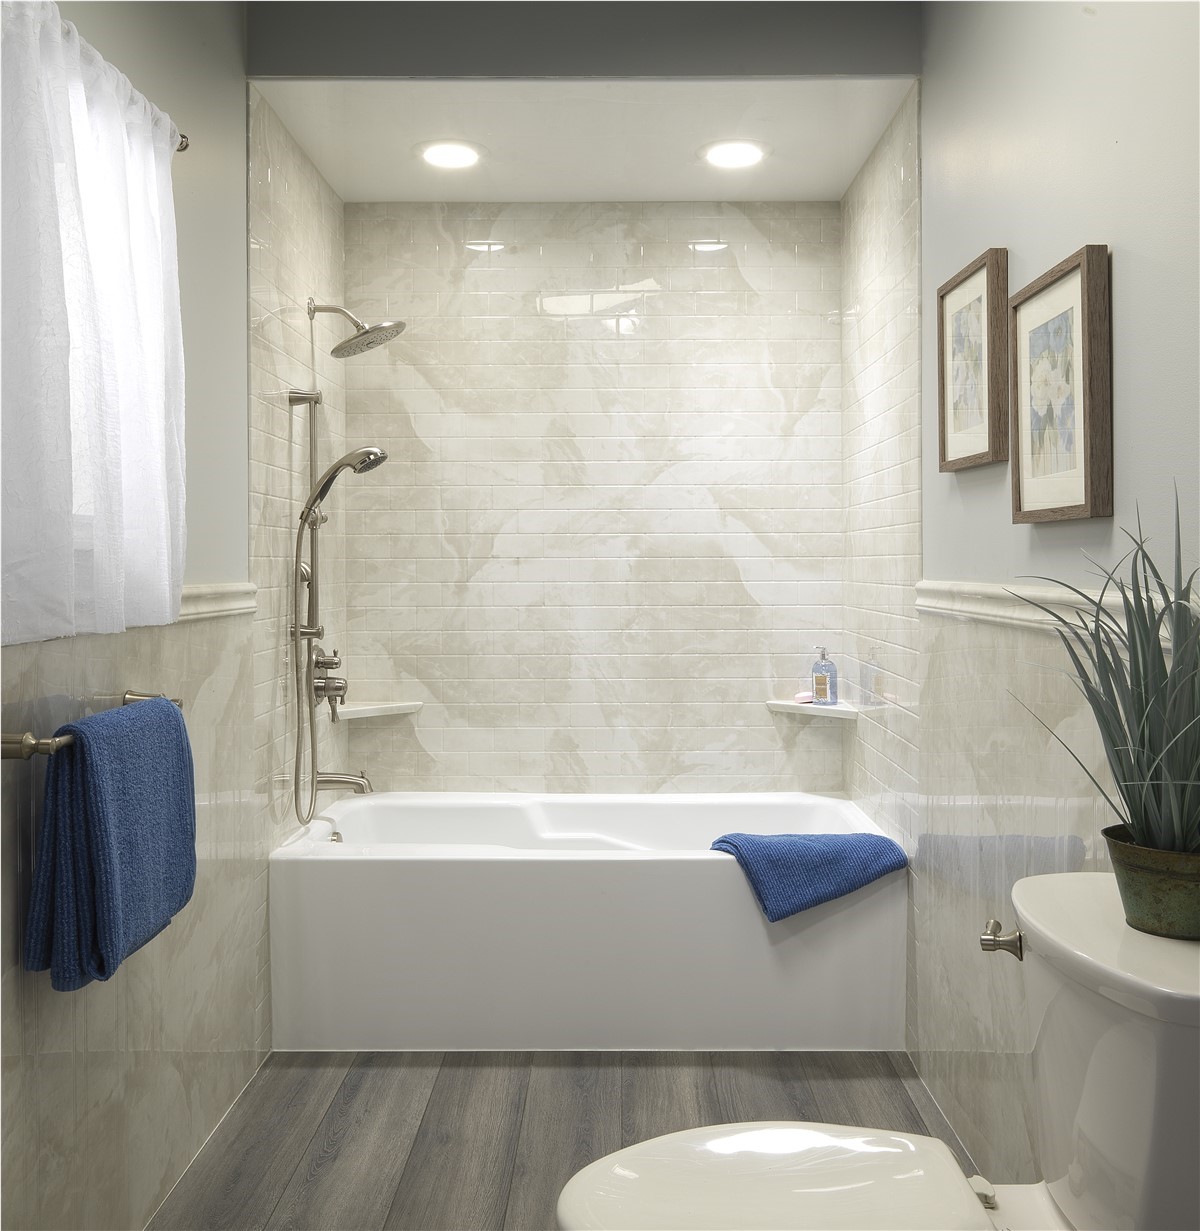 Top 3 Signs It's Time To Start Your Phoenix Bathroom Remodel